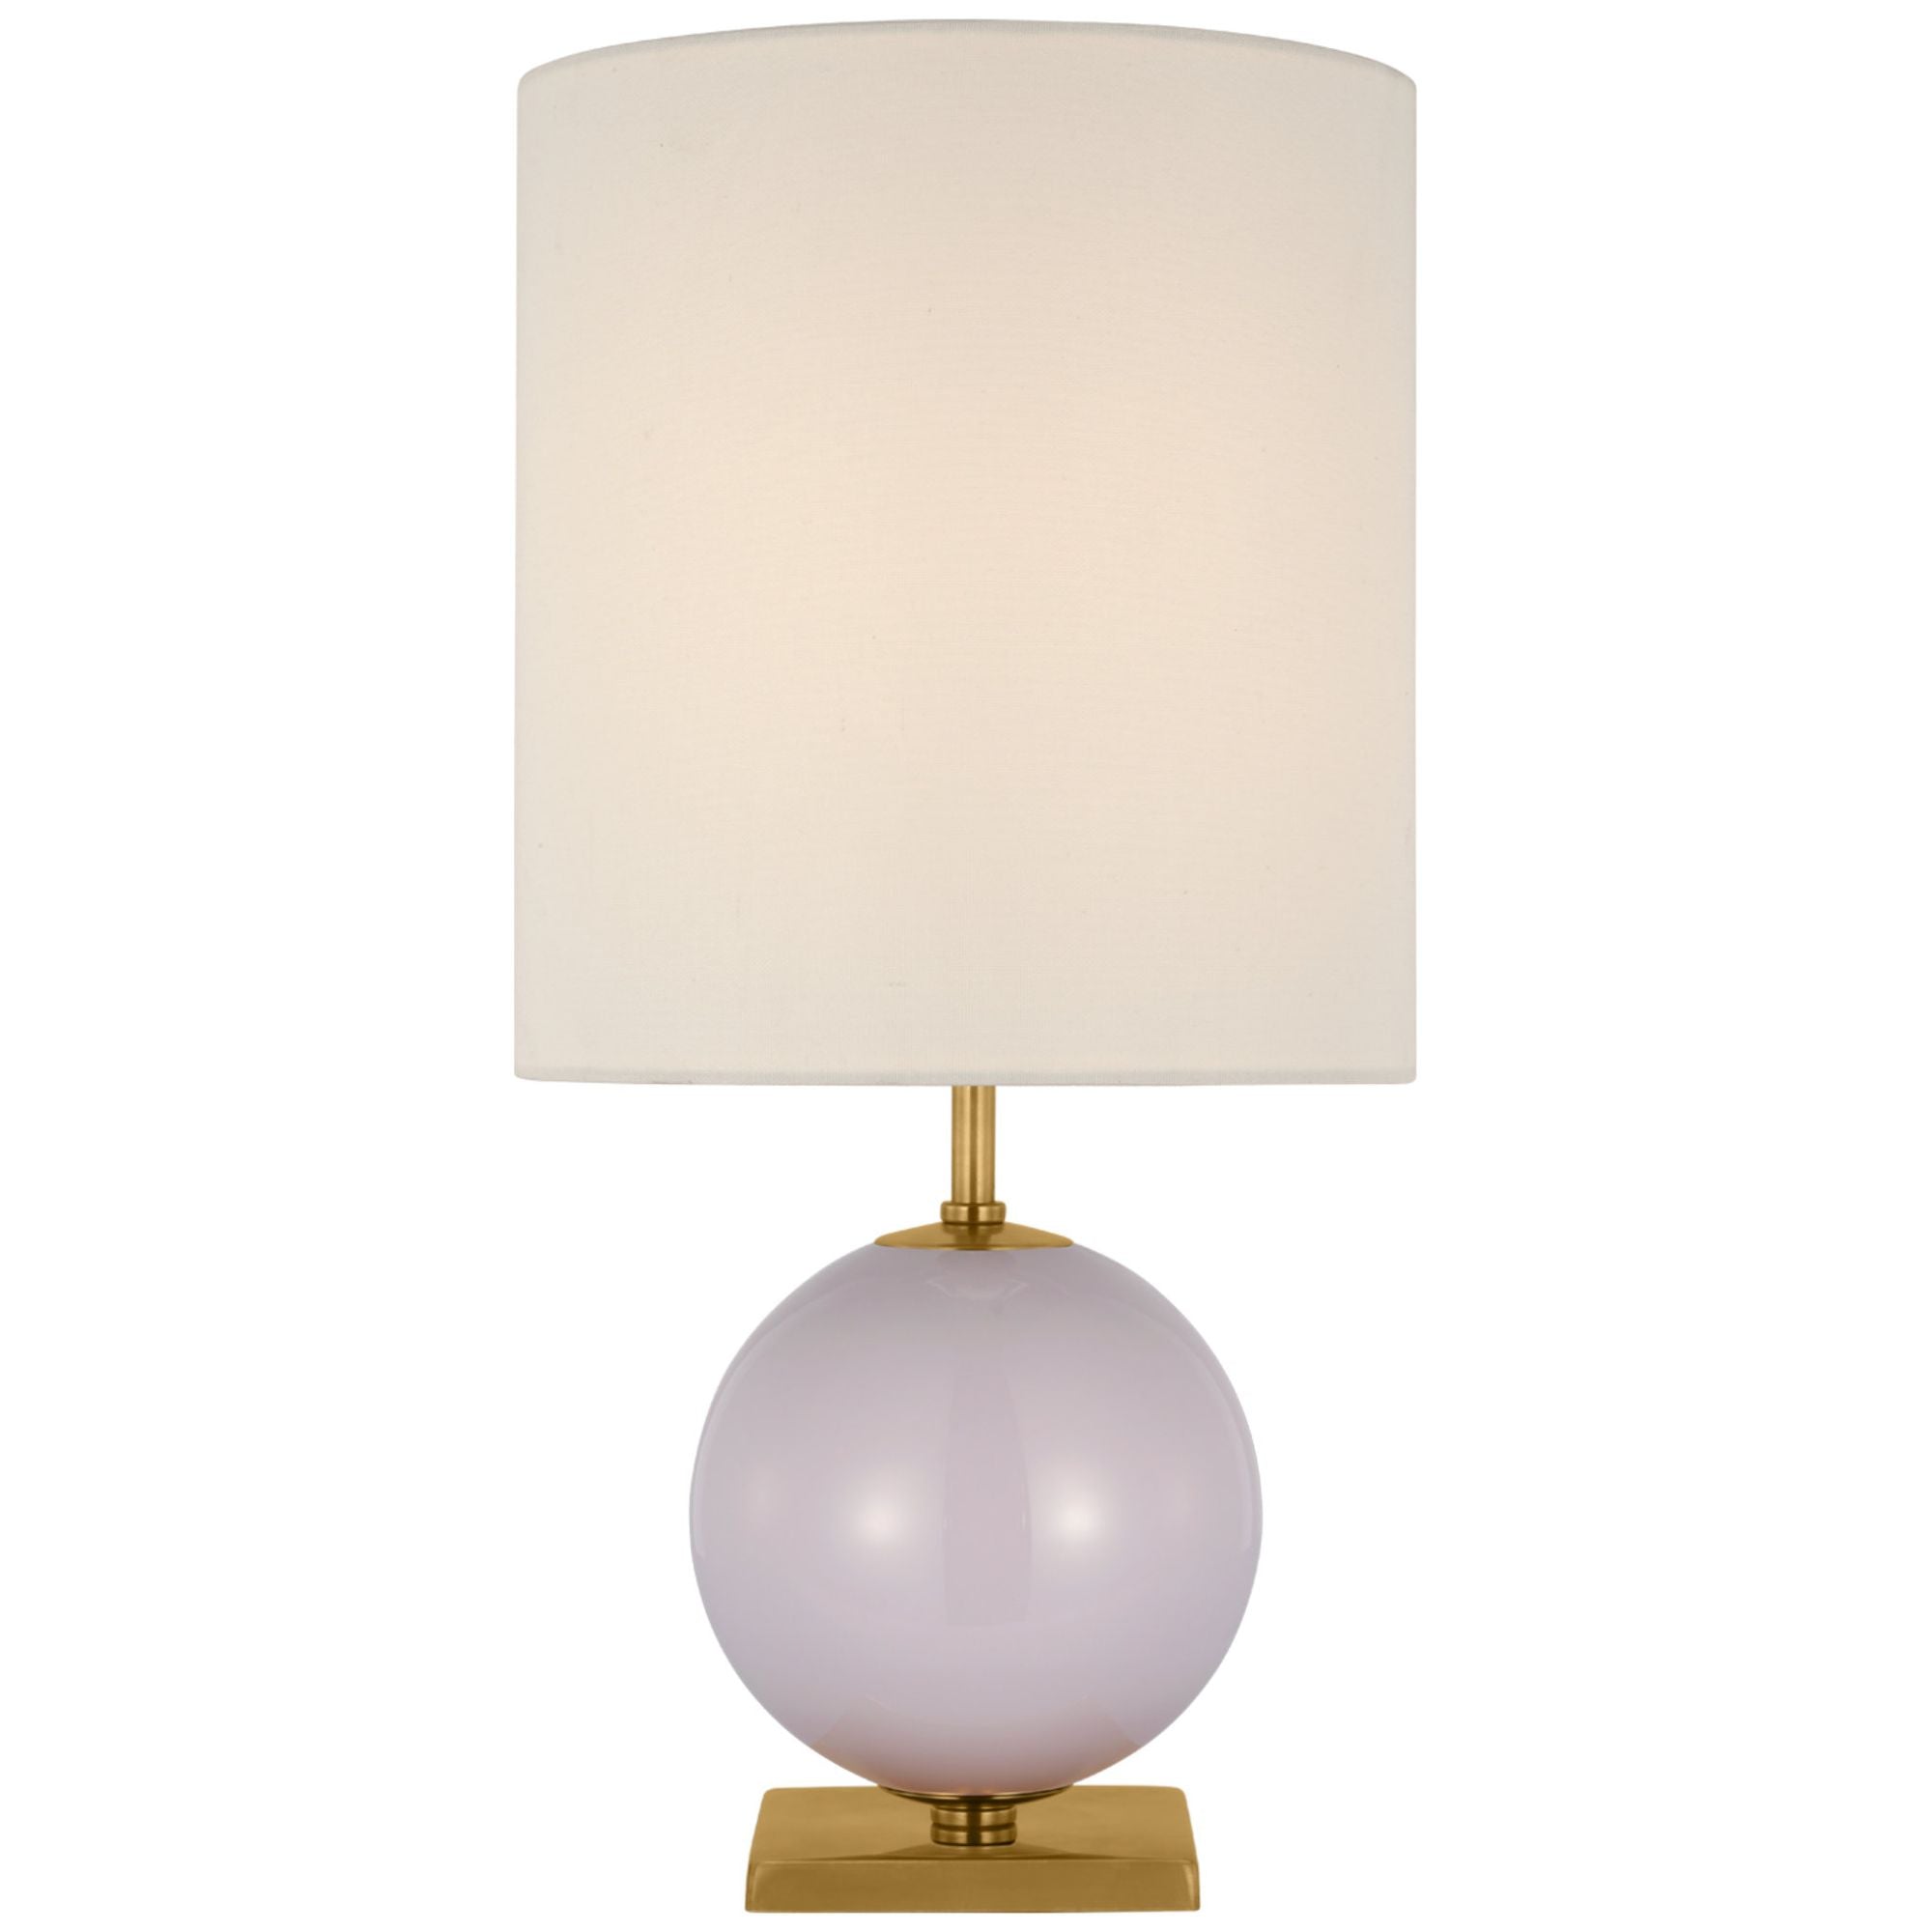 kate spade new york Elsie Small Table Lamp in Lilac Painted Glass with Linen Shade